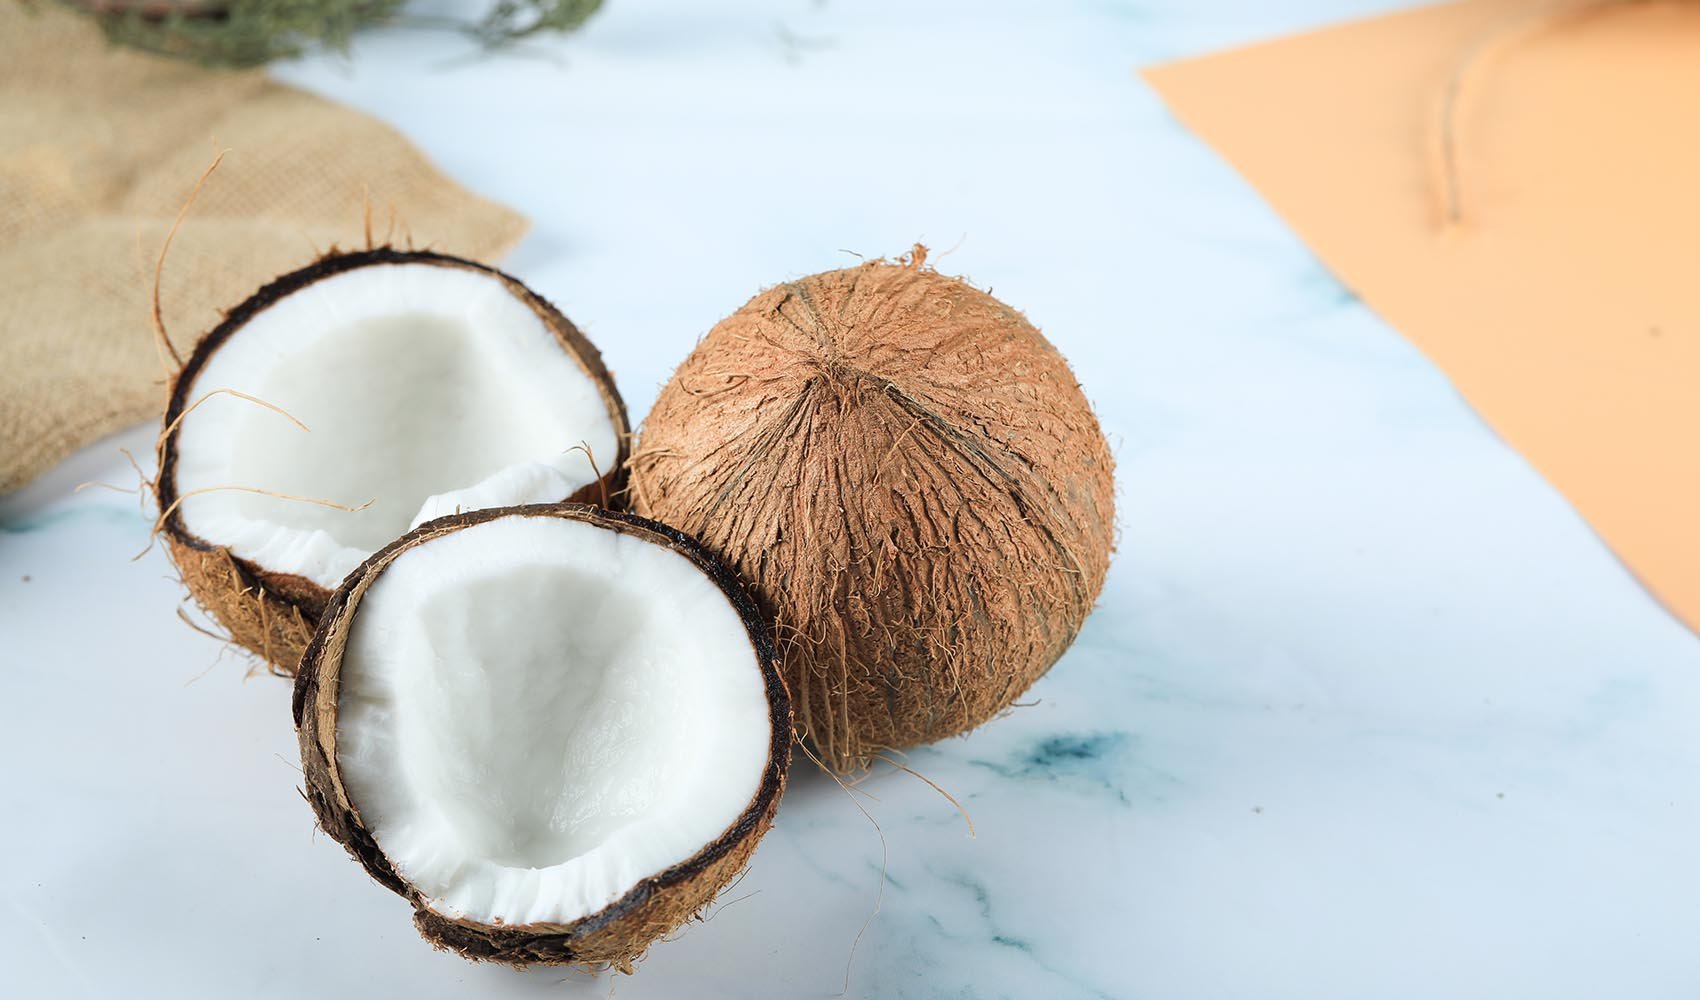 Dried-Coconut-Nutrition-Facts-Health-Benefits-and-Recipes-1